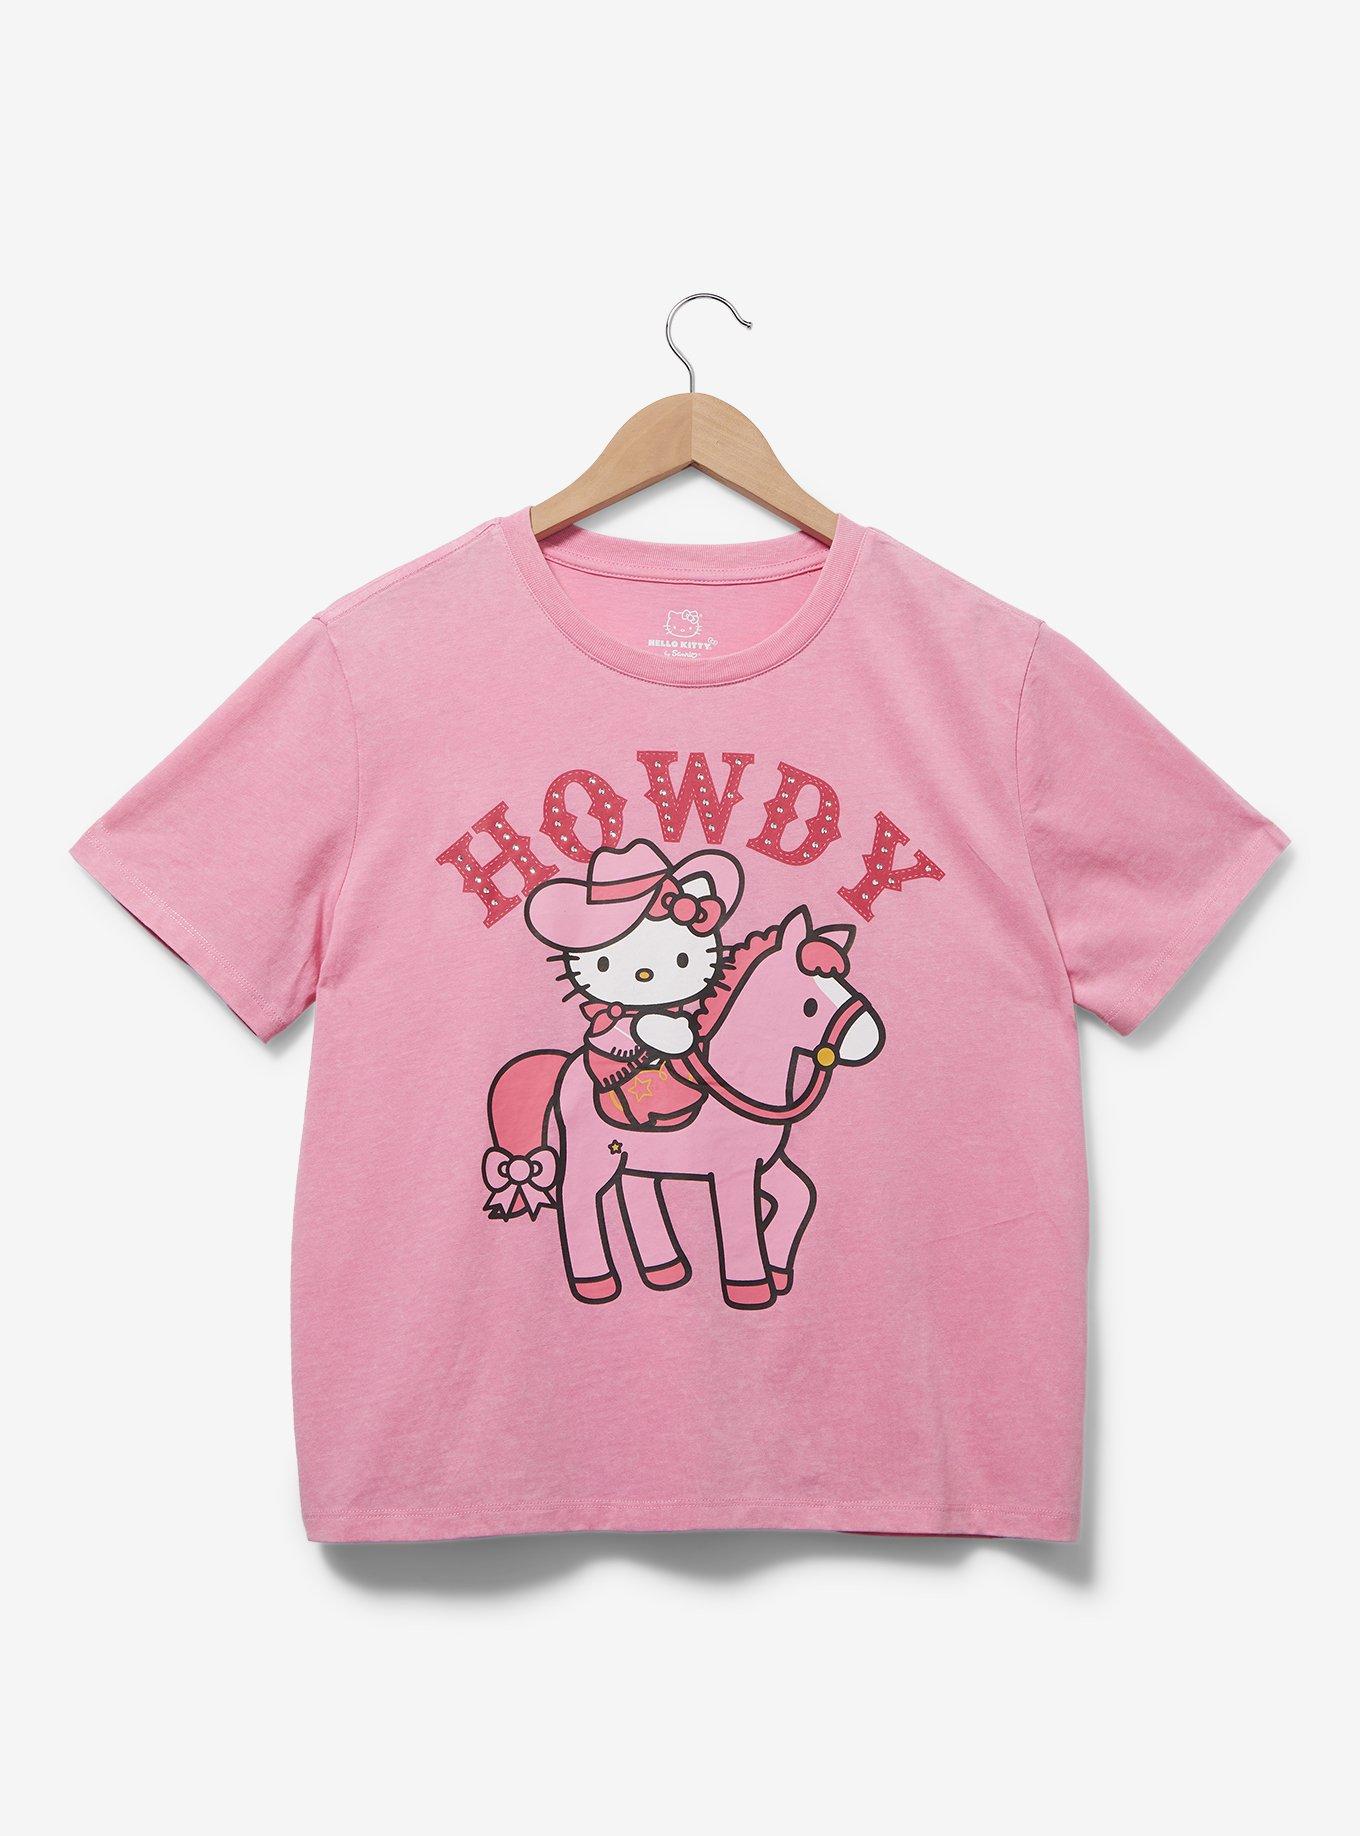 Sanrio Hello Kitty Cowgirl Cropped Women's T-Shirt - BoxLunch Exclusive, , hi-res